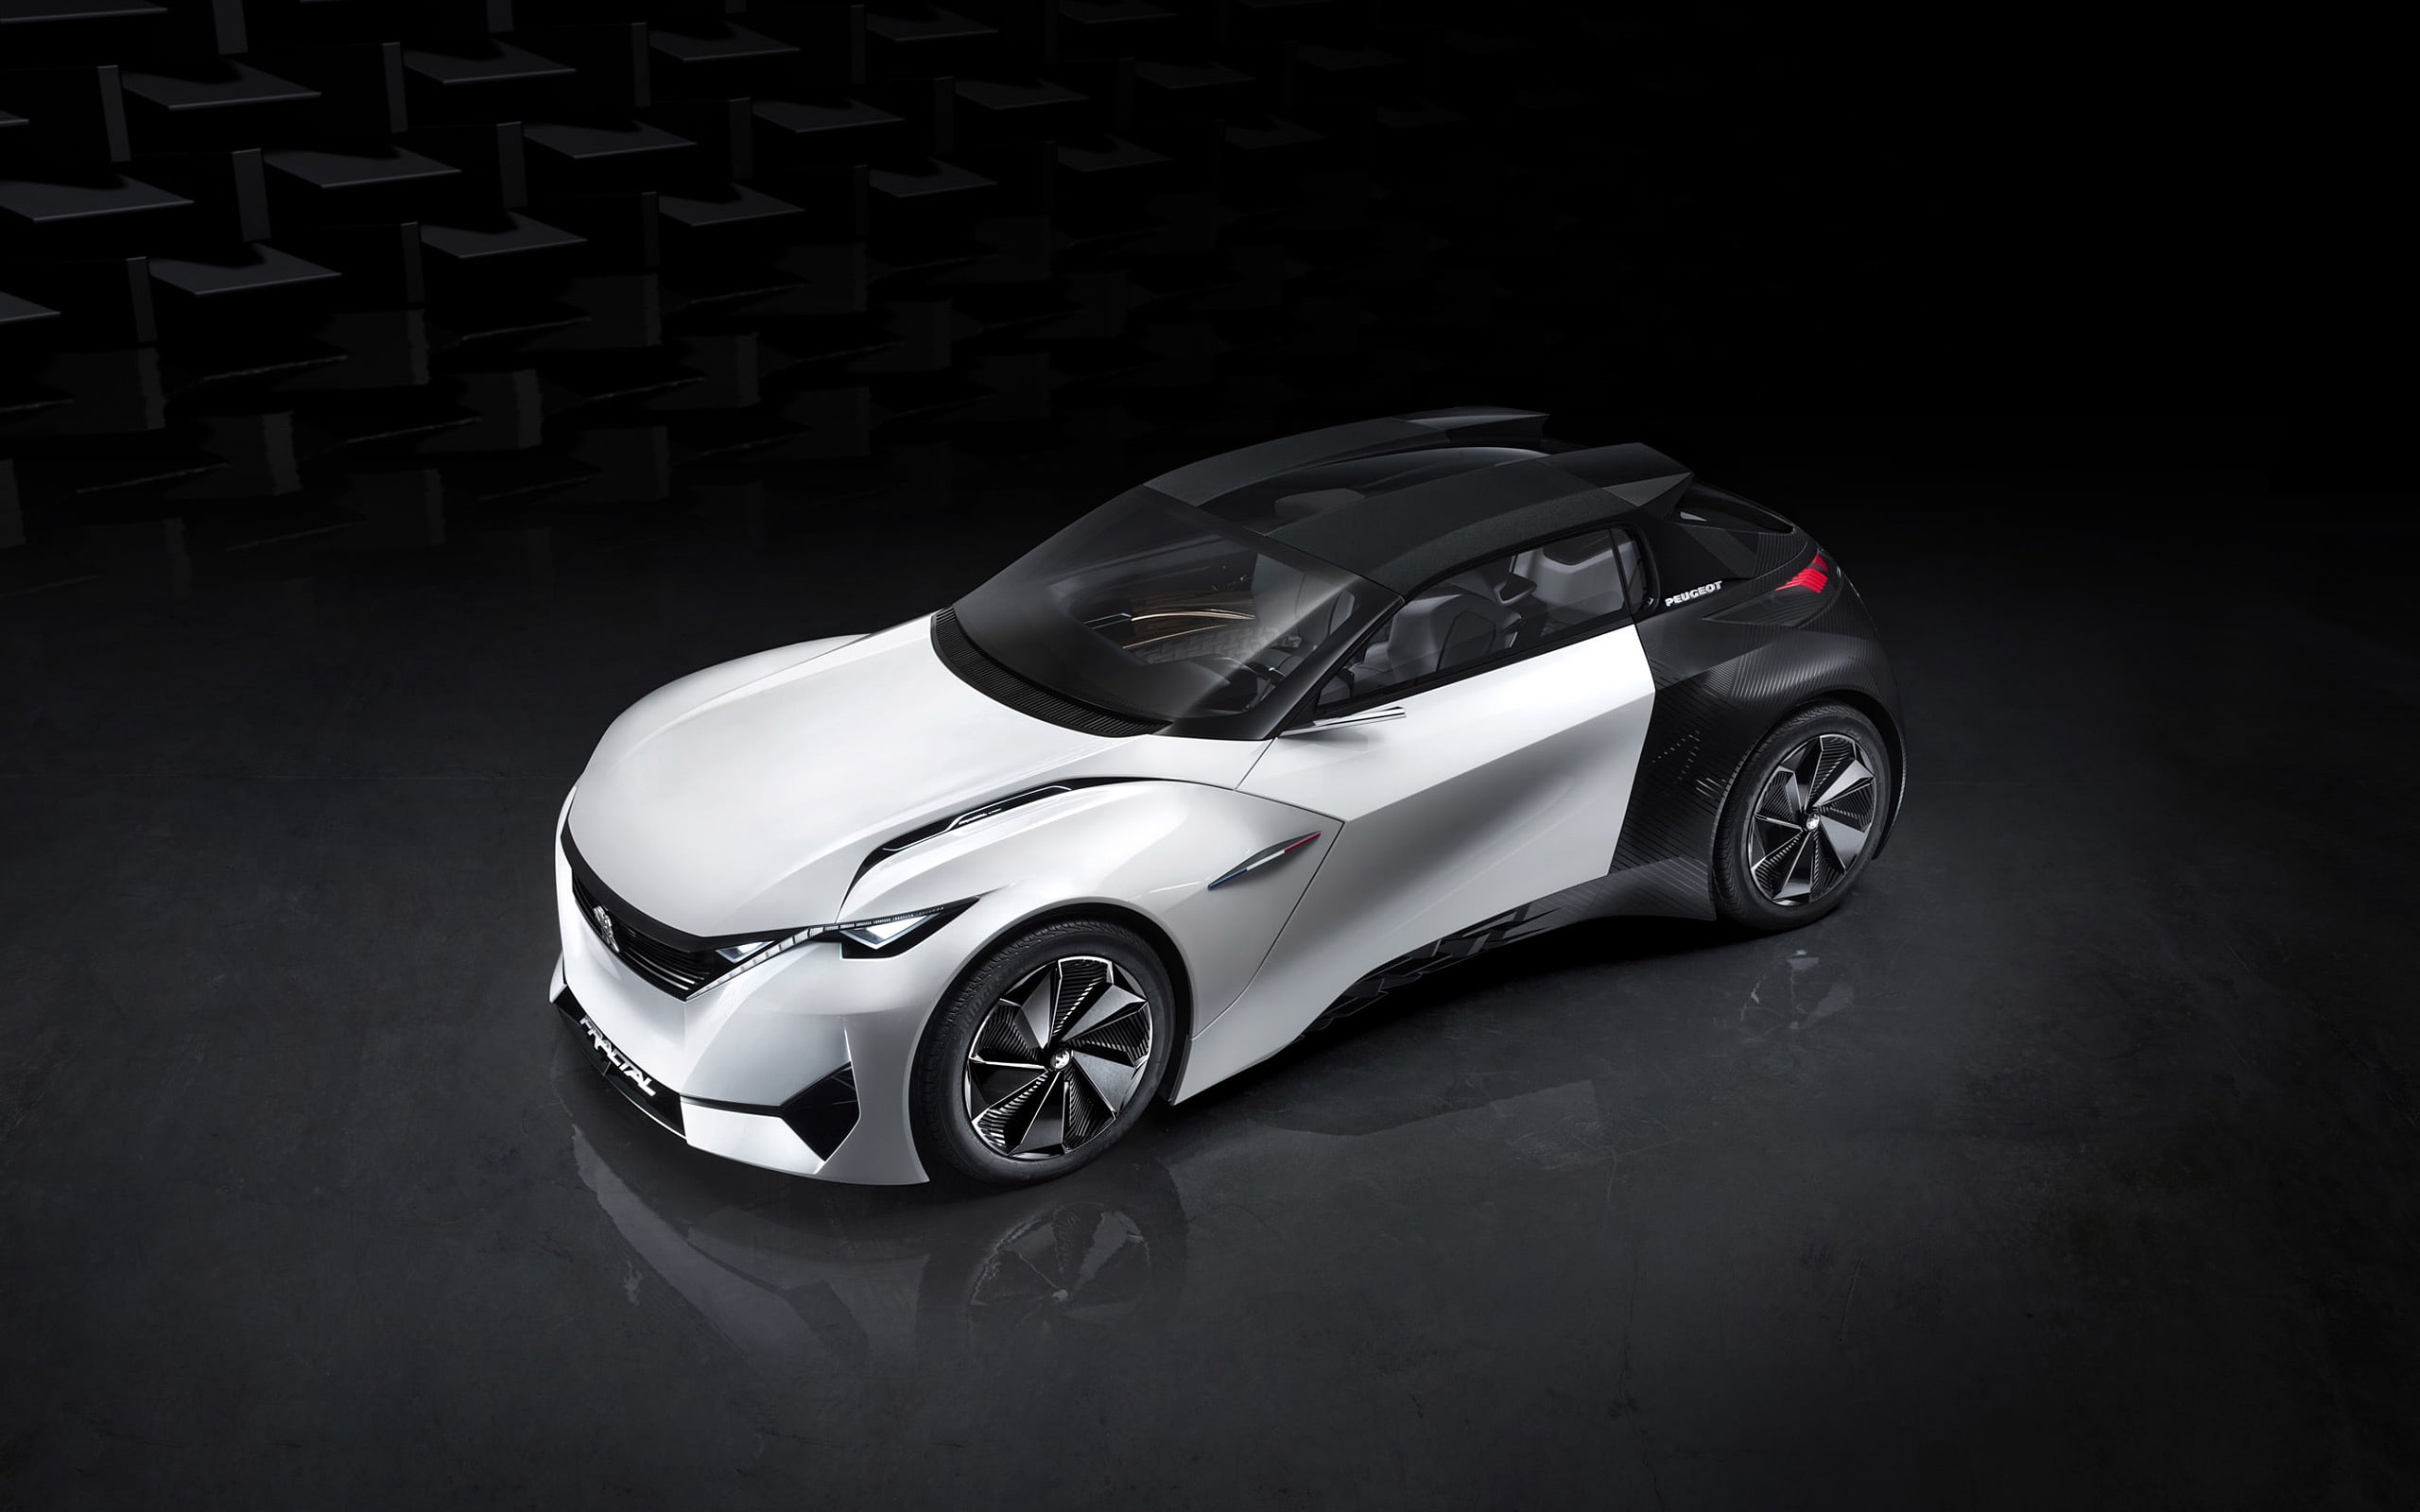 gray and black coupe, peugeot, fractal, concept, top view, car